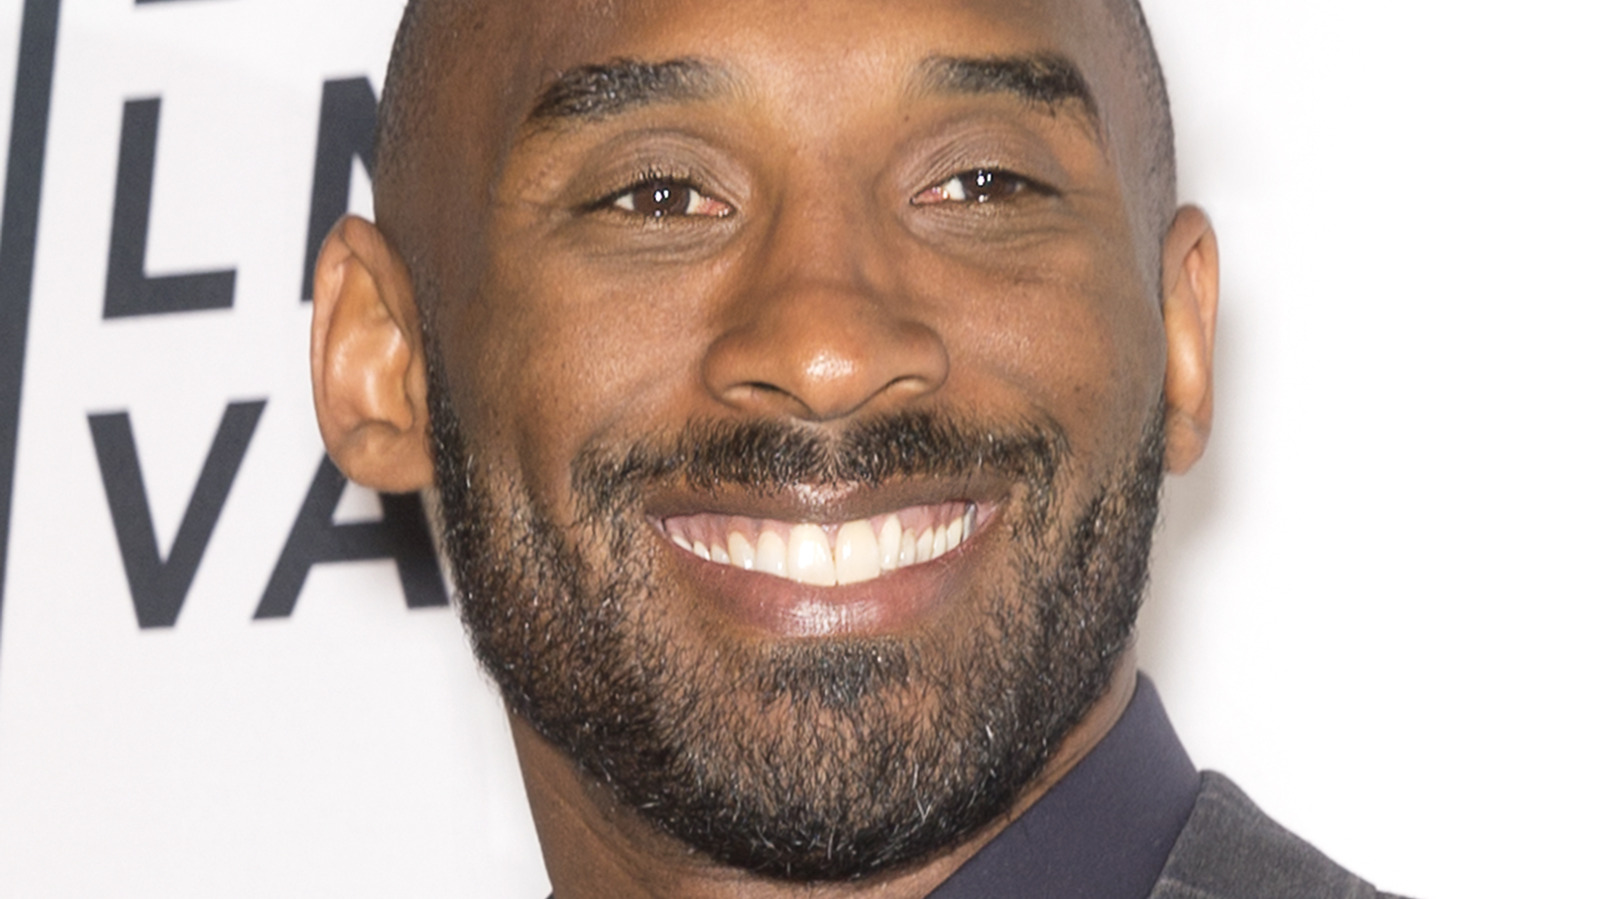 Kobe Bryant Was Set To Make An Unexpected Career Move Before His Tragic Death